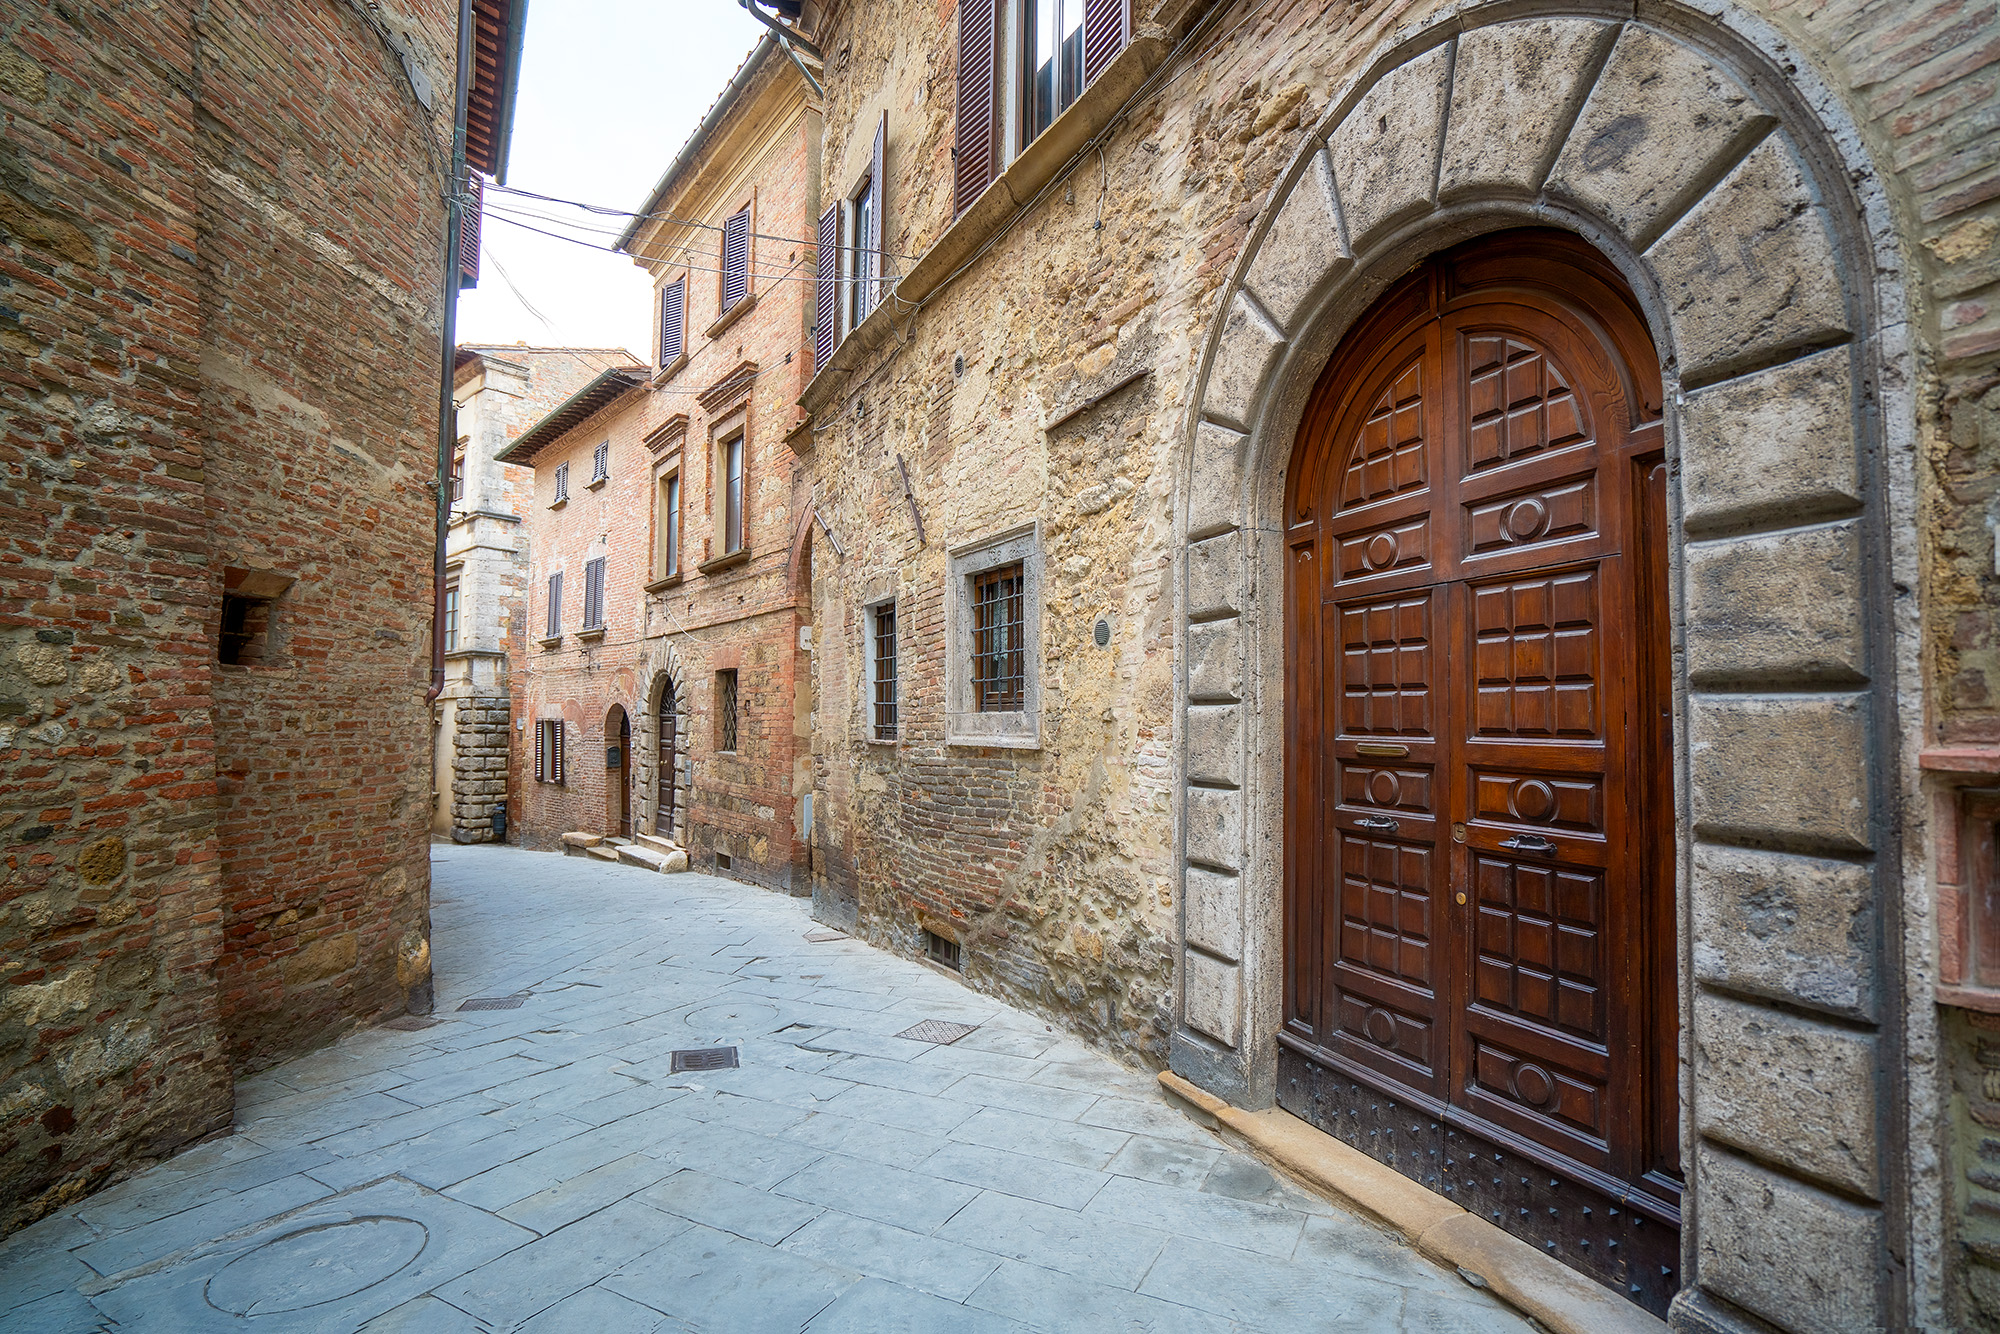 In the heart of Montepulciano, Tuscany, Italy, this photograph captures the essence of village charm. Taken with a wide-angle...